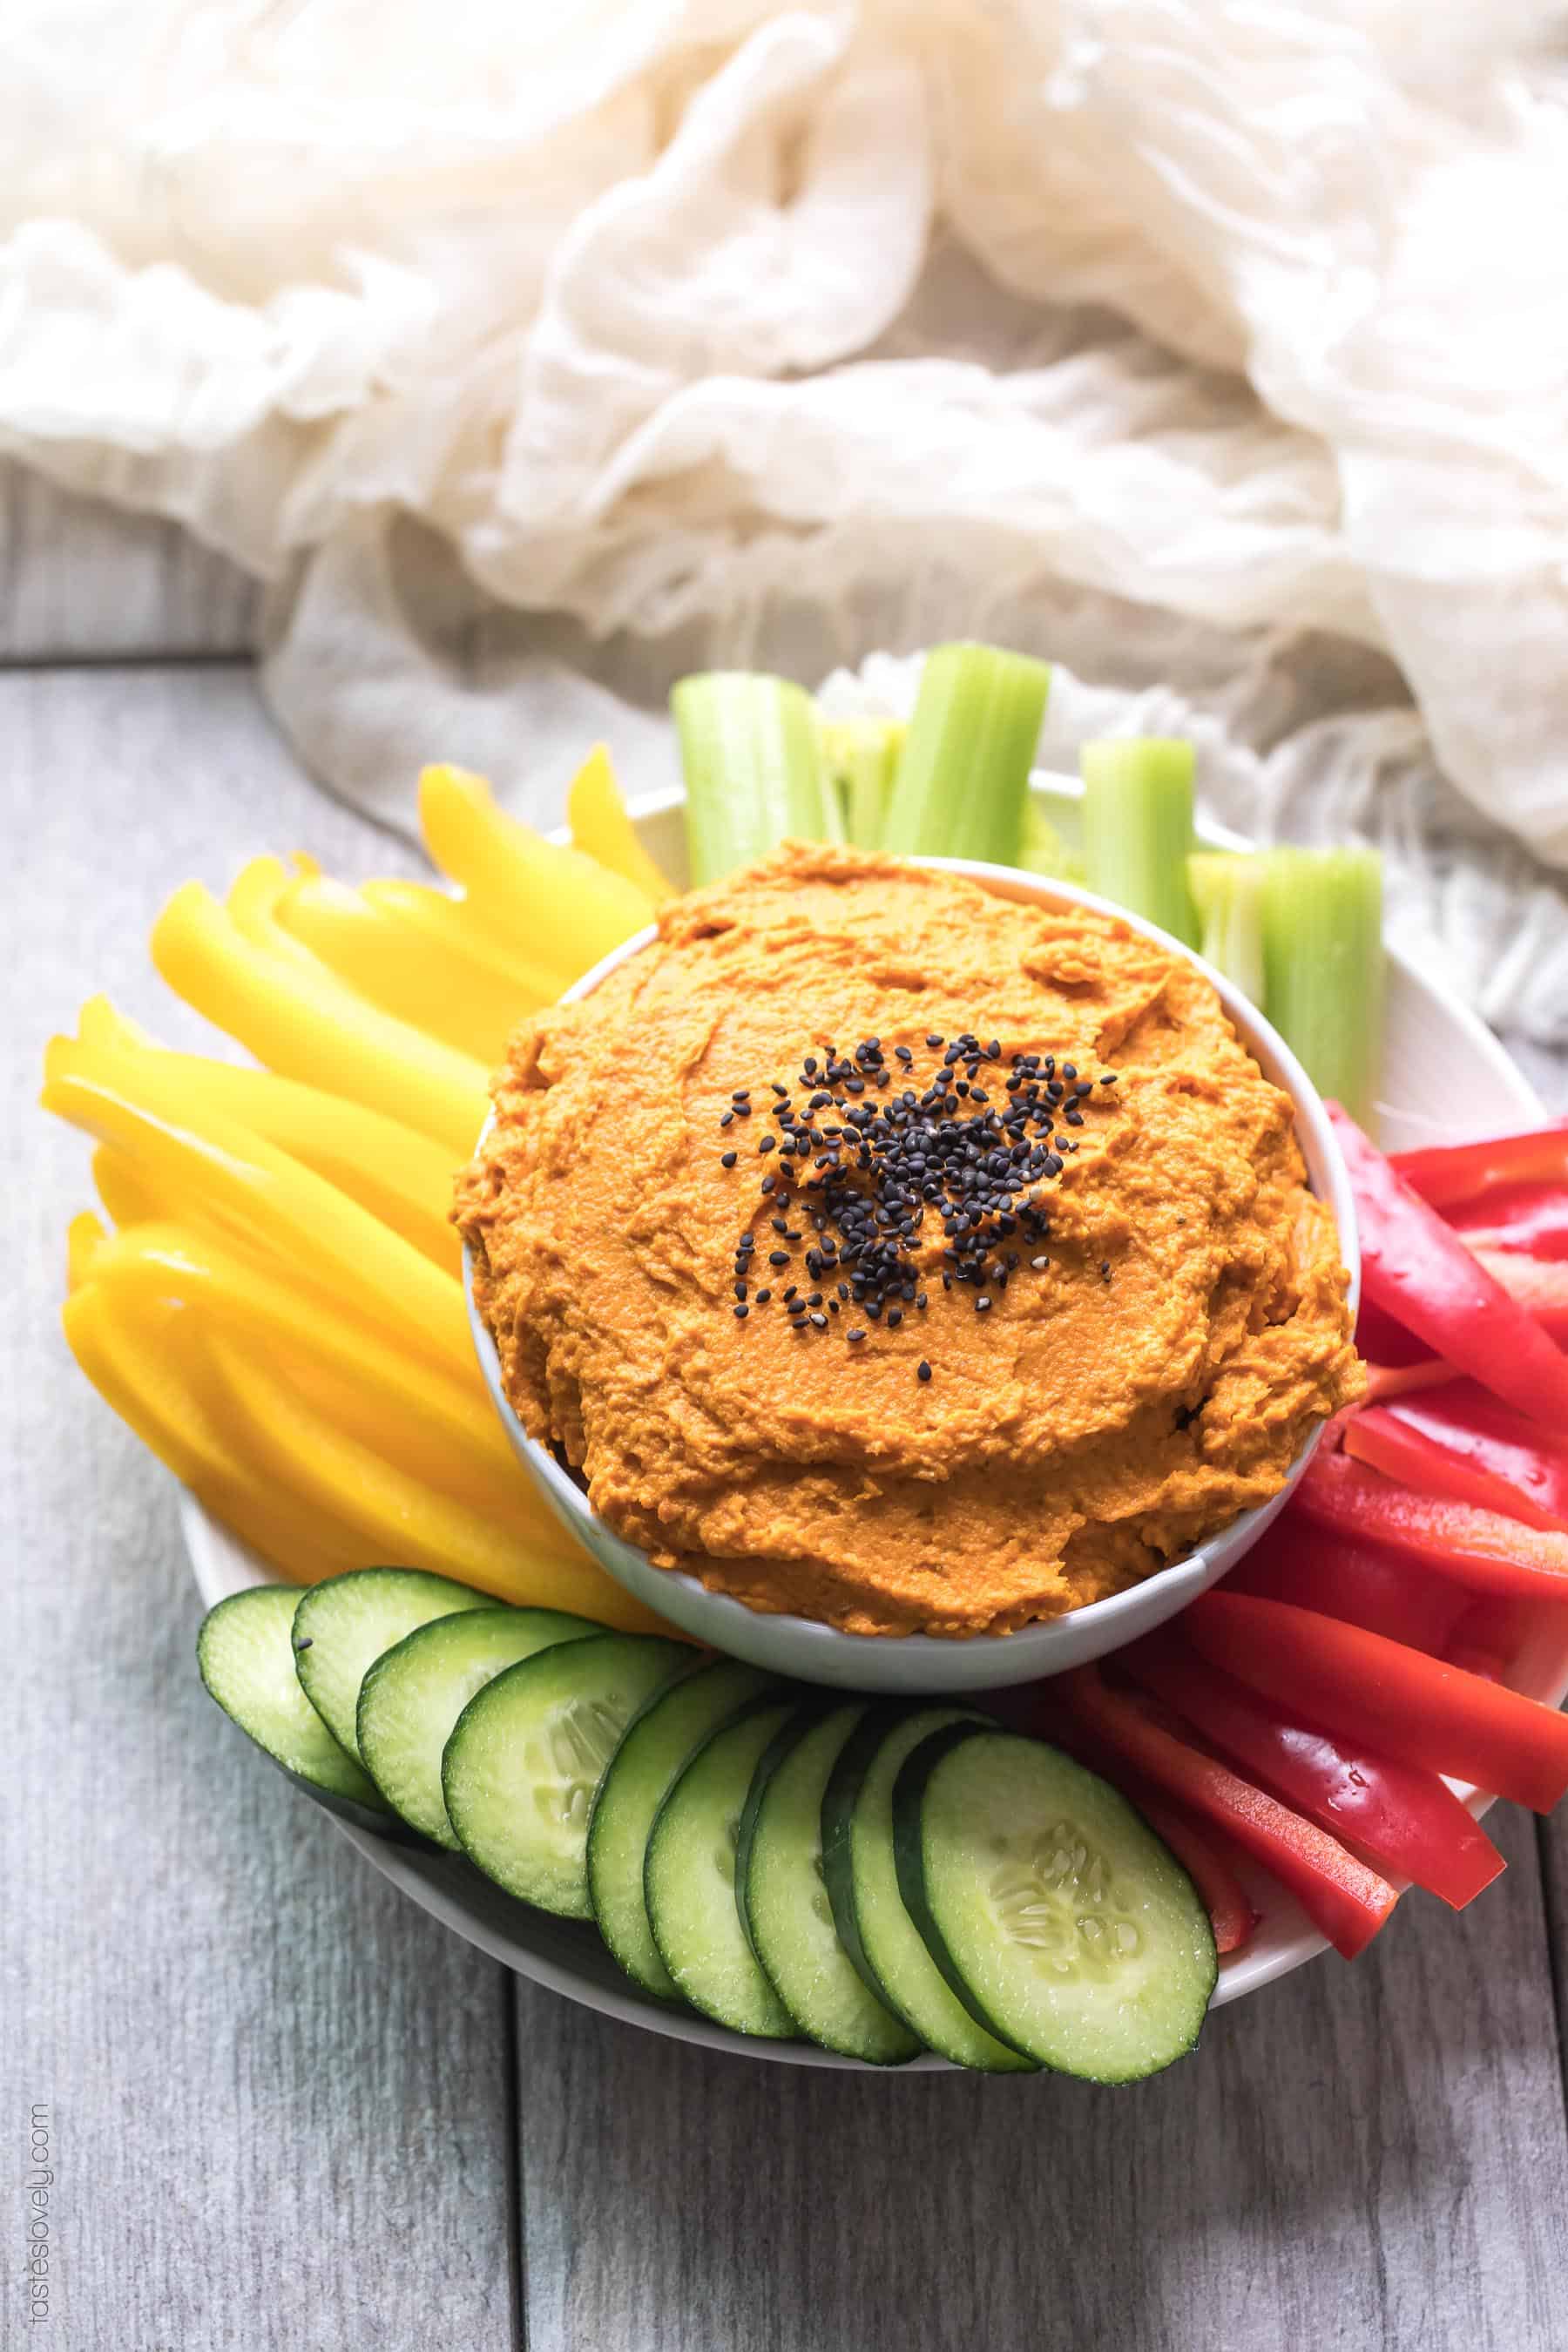 Paleo & Whole30 Roasted Carrot Dip - a delicious and healthy appetizer everyone loves! Gluten free, grain free, dairy free, sugar free, low carb, vegan, clean eating.